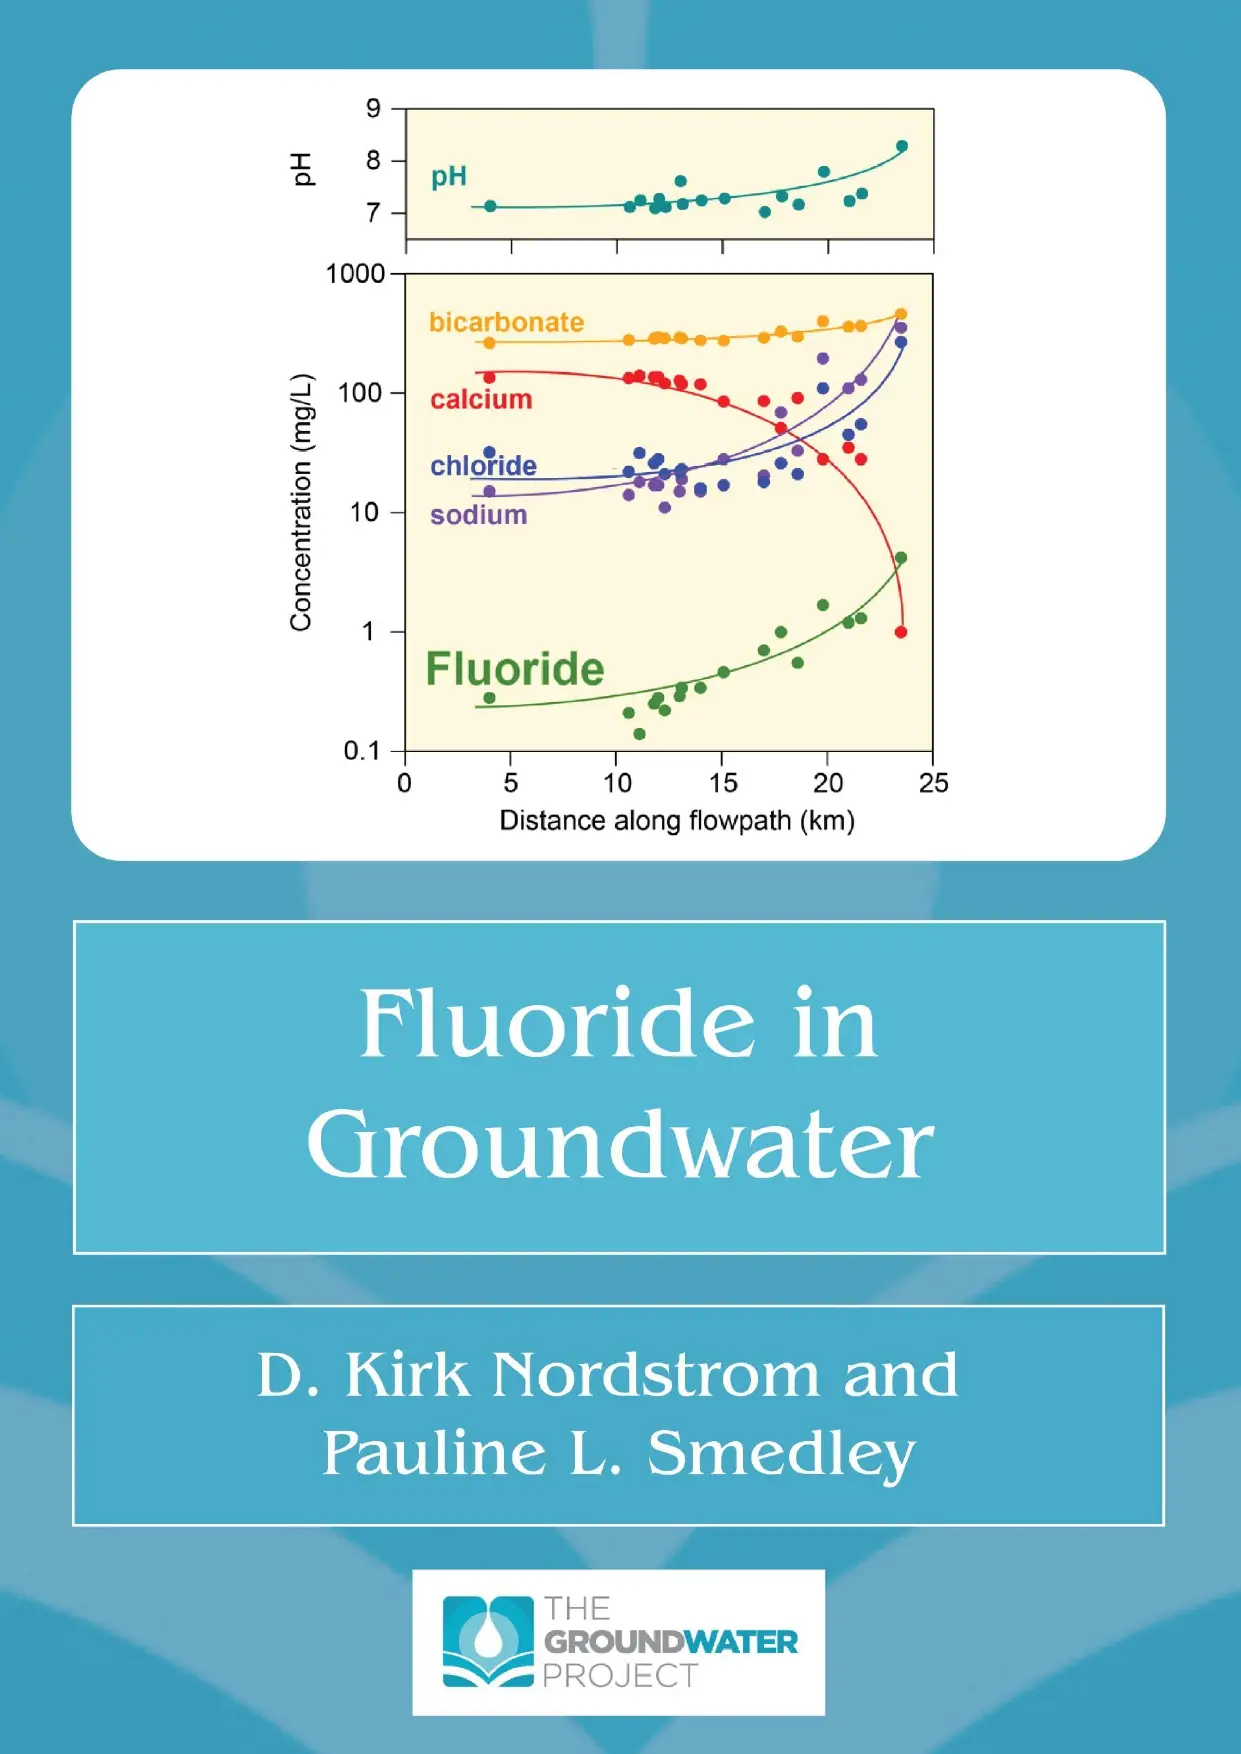 Fluoride in Groundwater